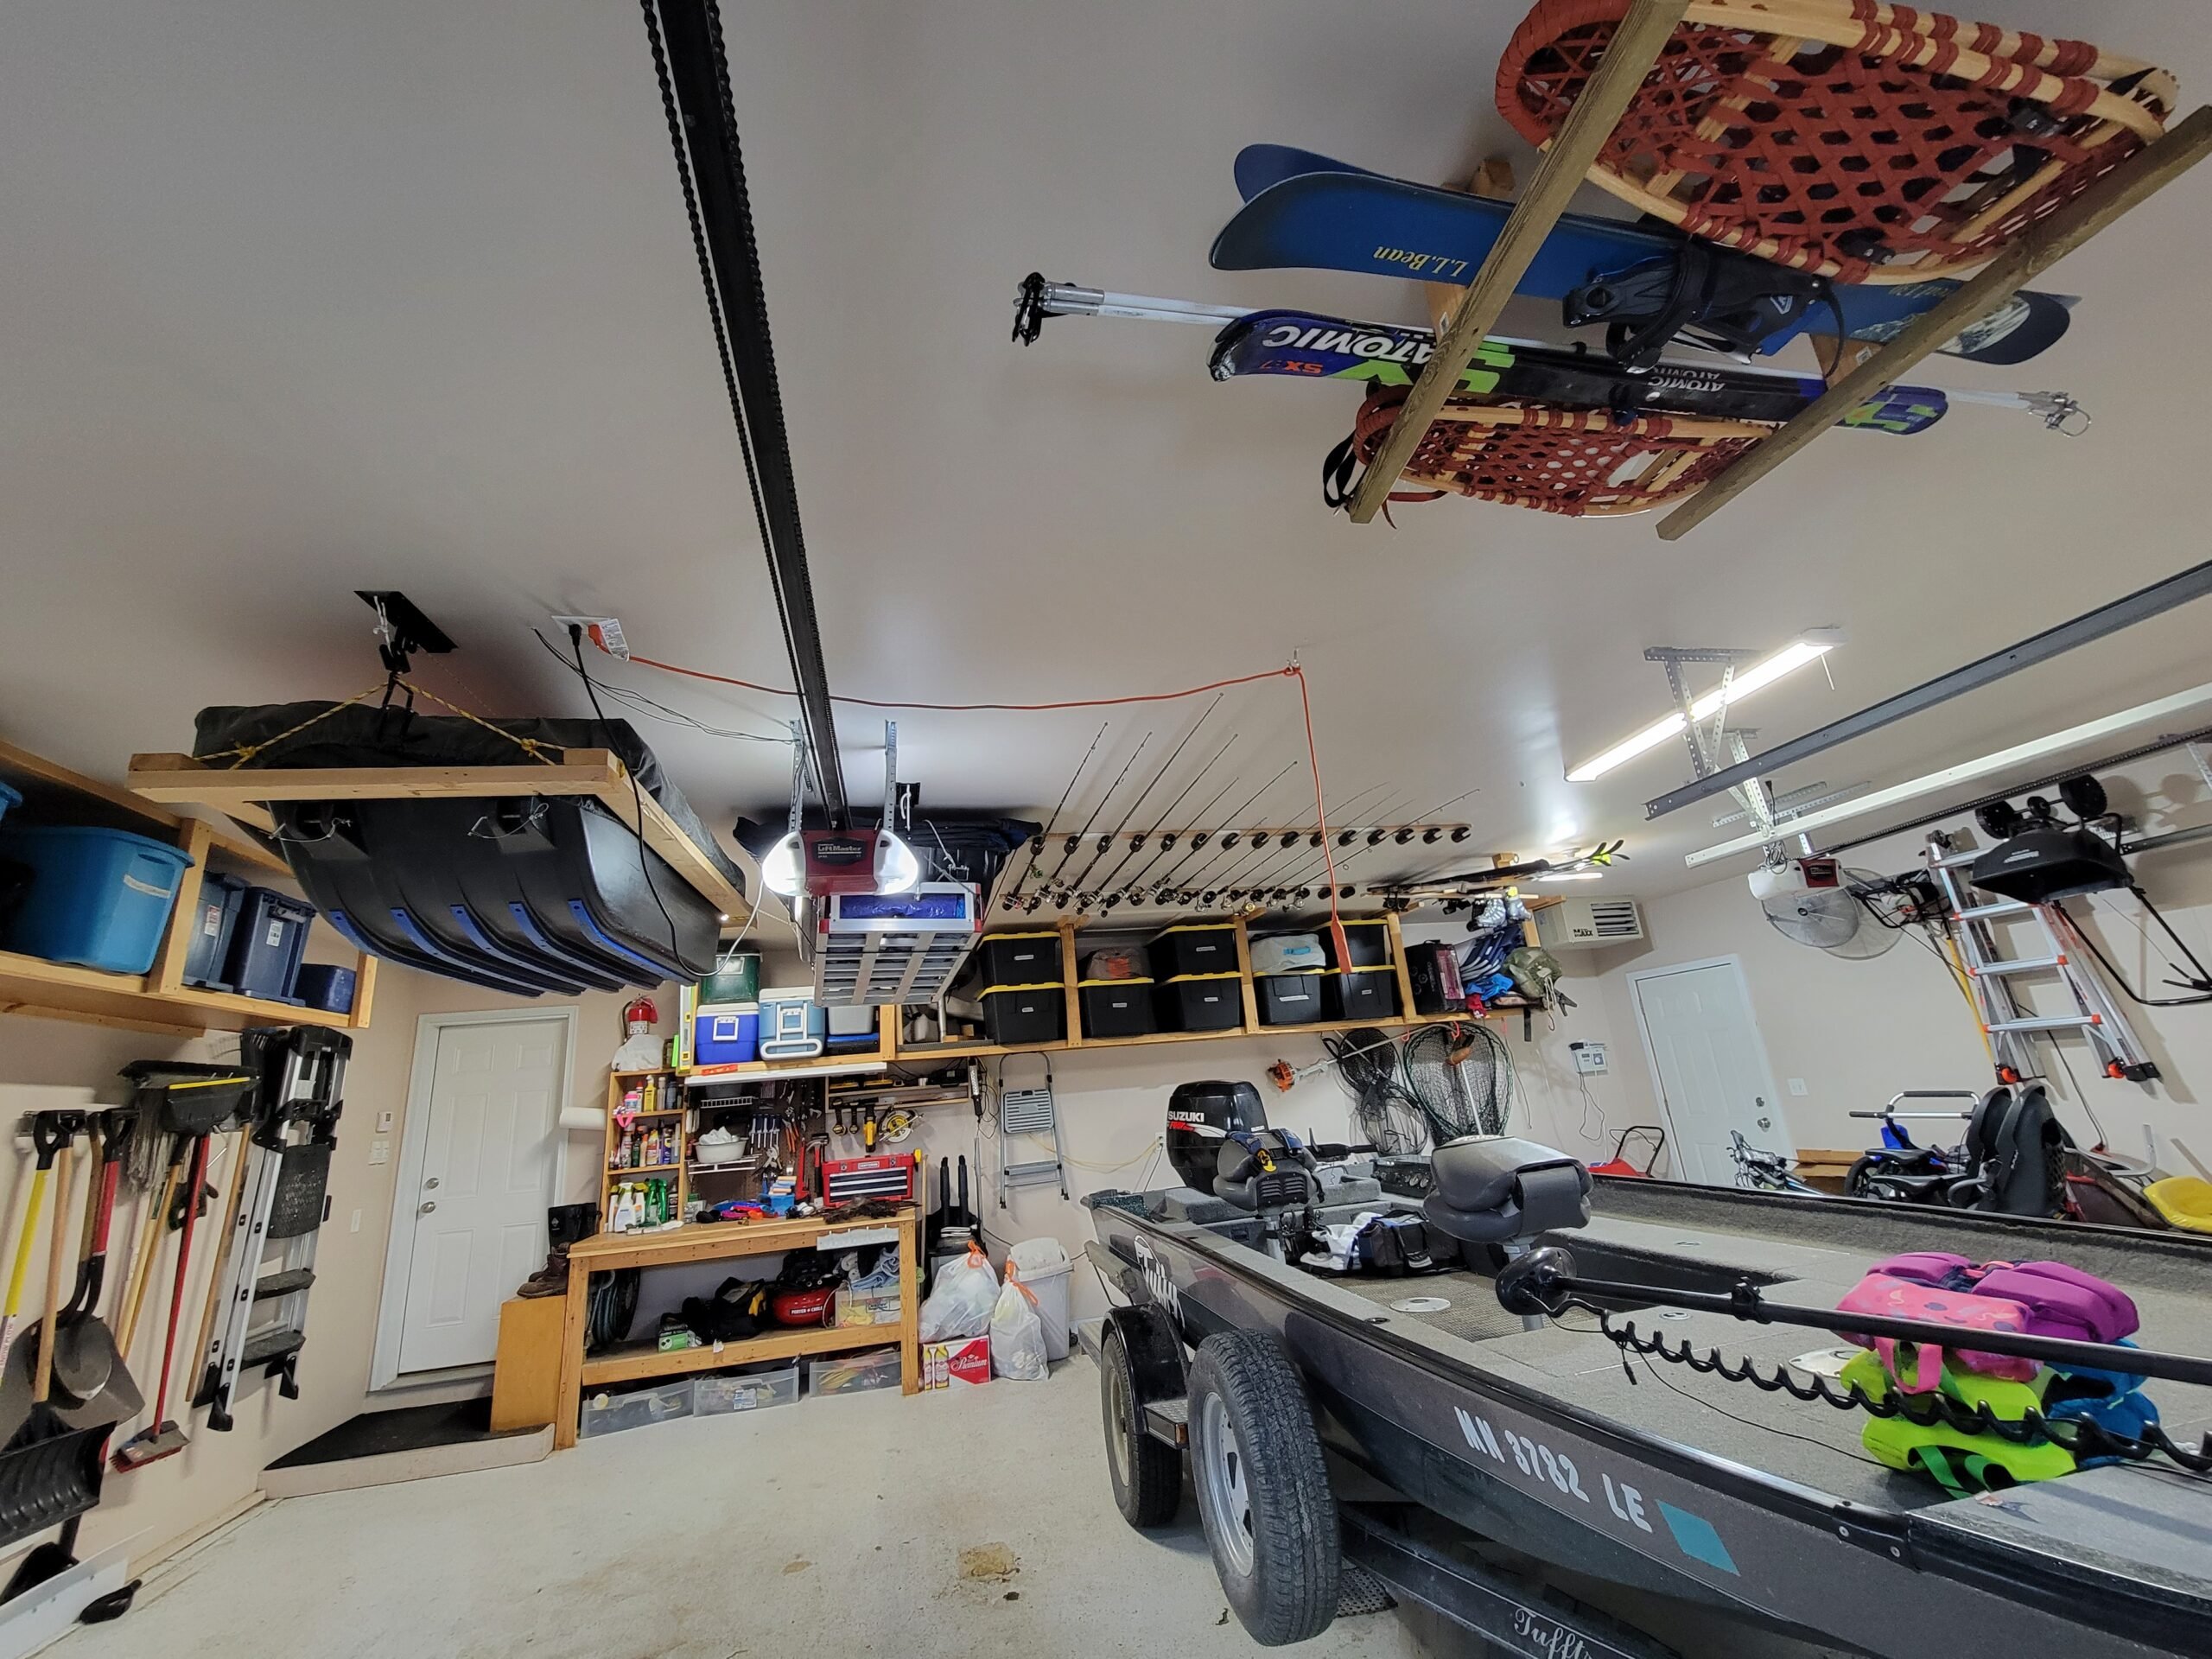 Storing fishing rods in the garage - General Discussion Forum